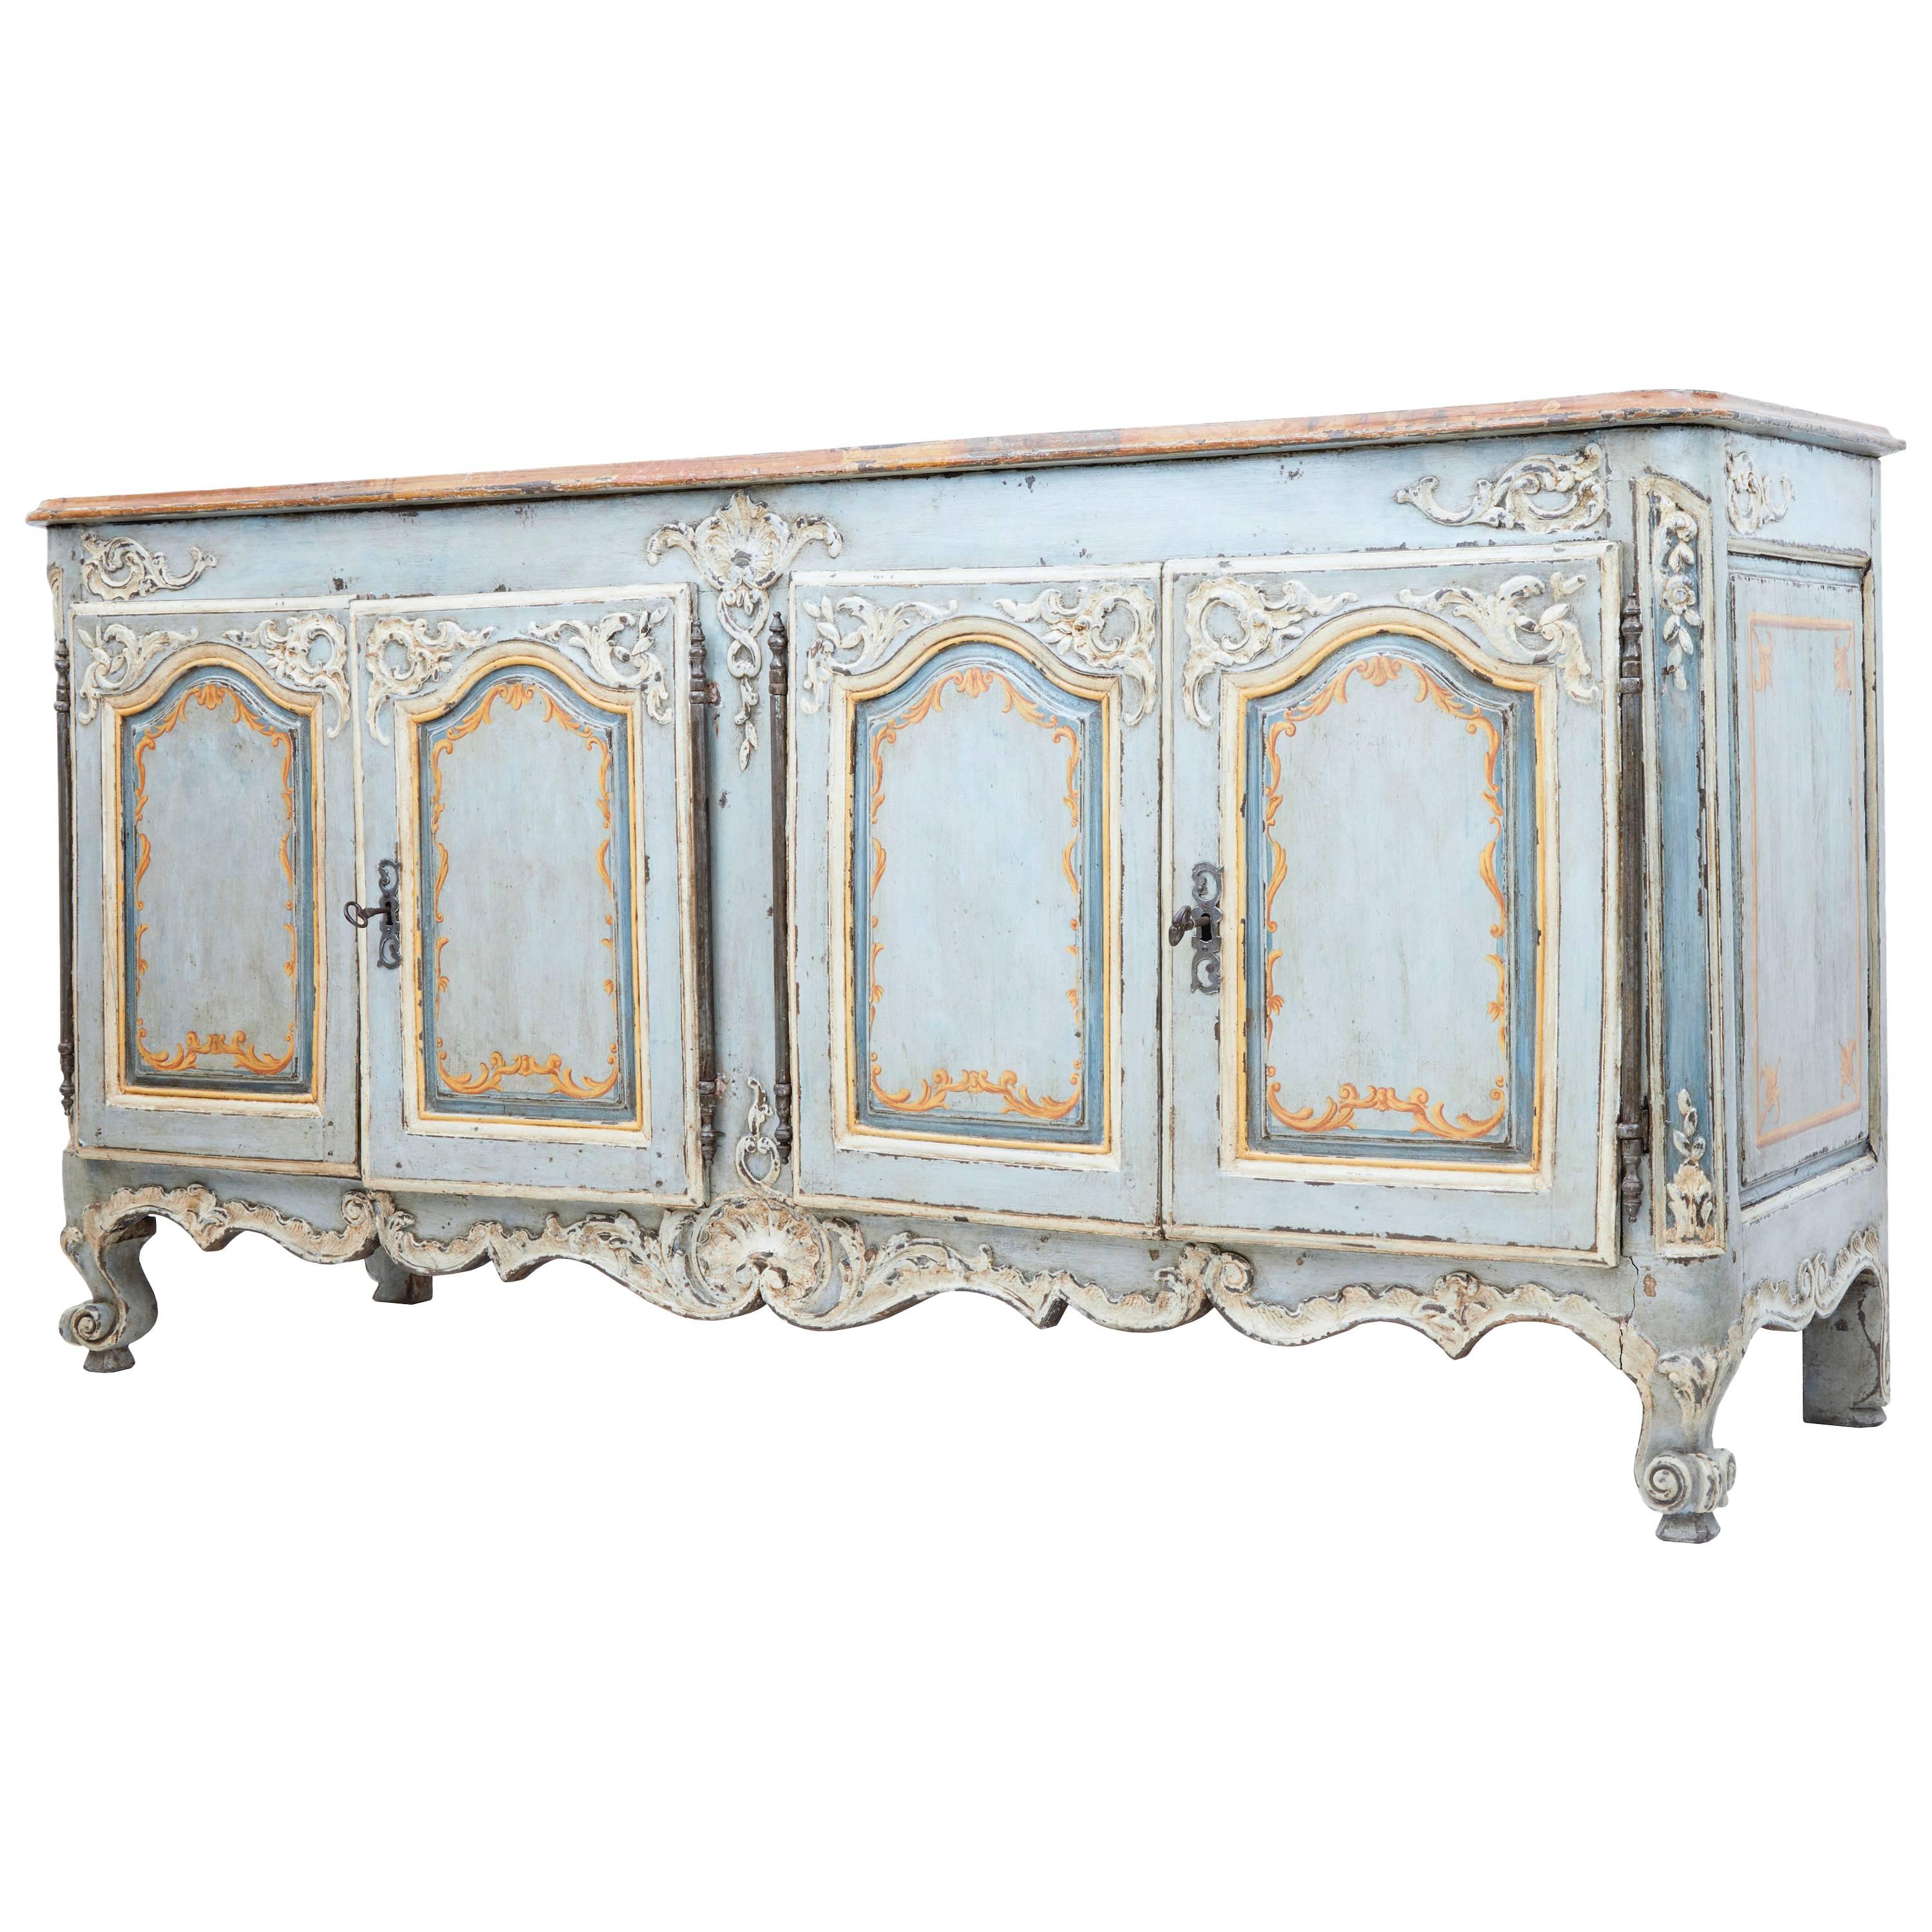 Rare 18th Century French Oak Painted Dresser Sideboard